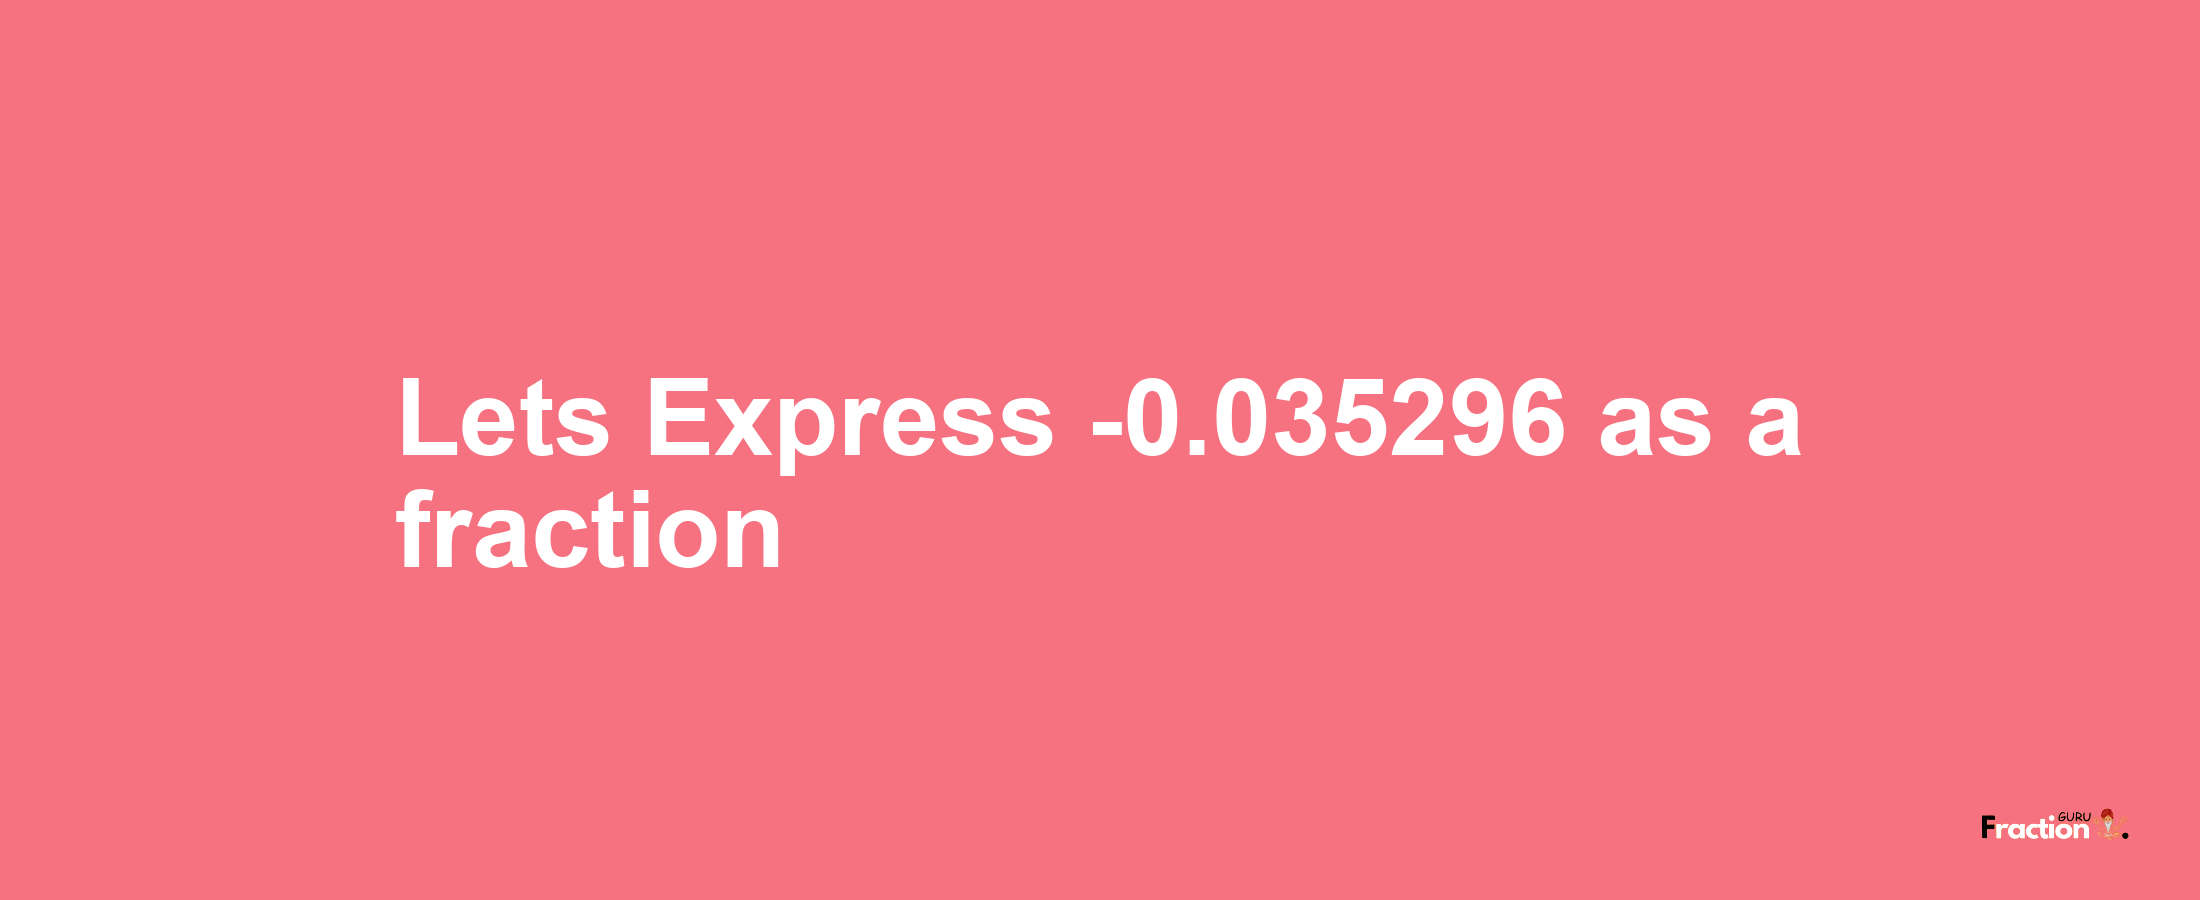 Lets Express -0.035296 as afraction